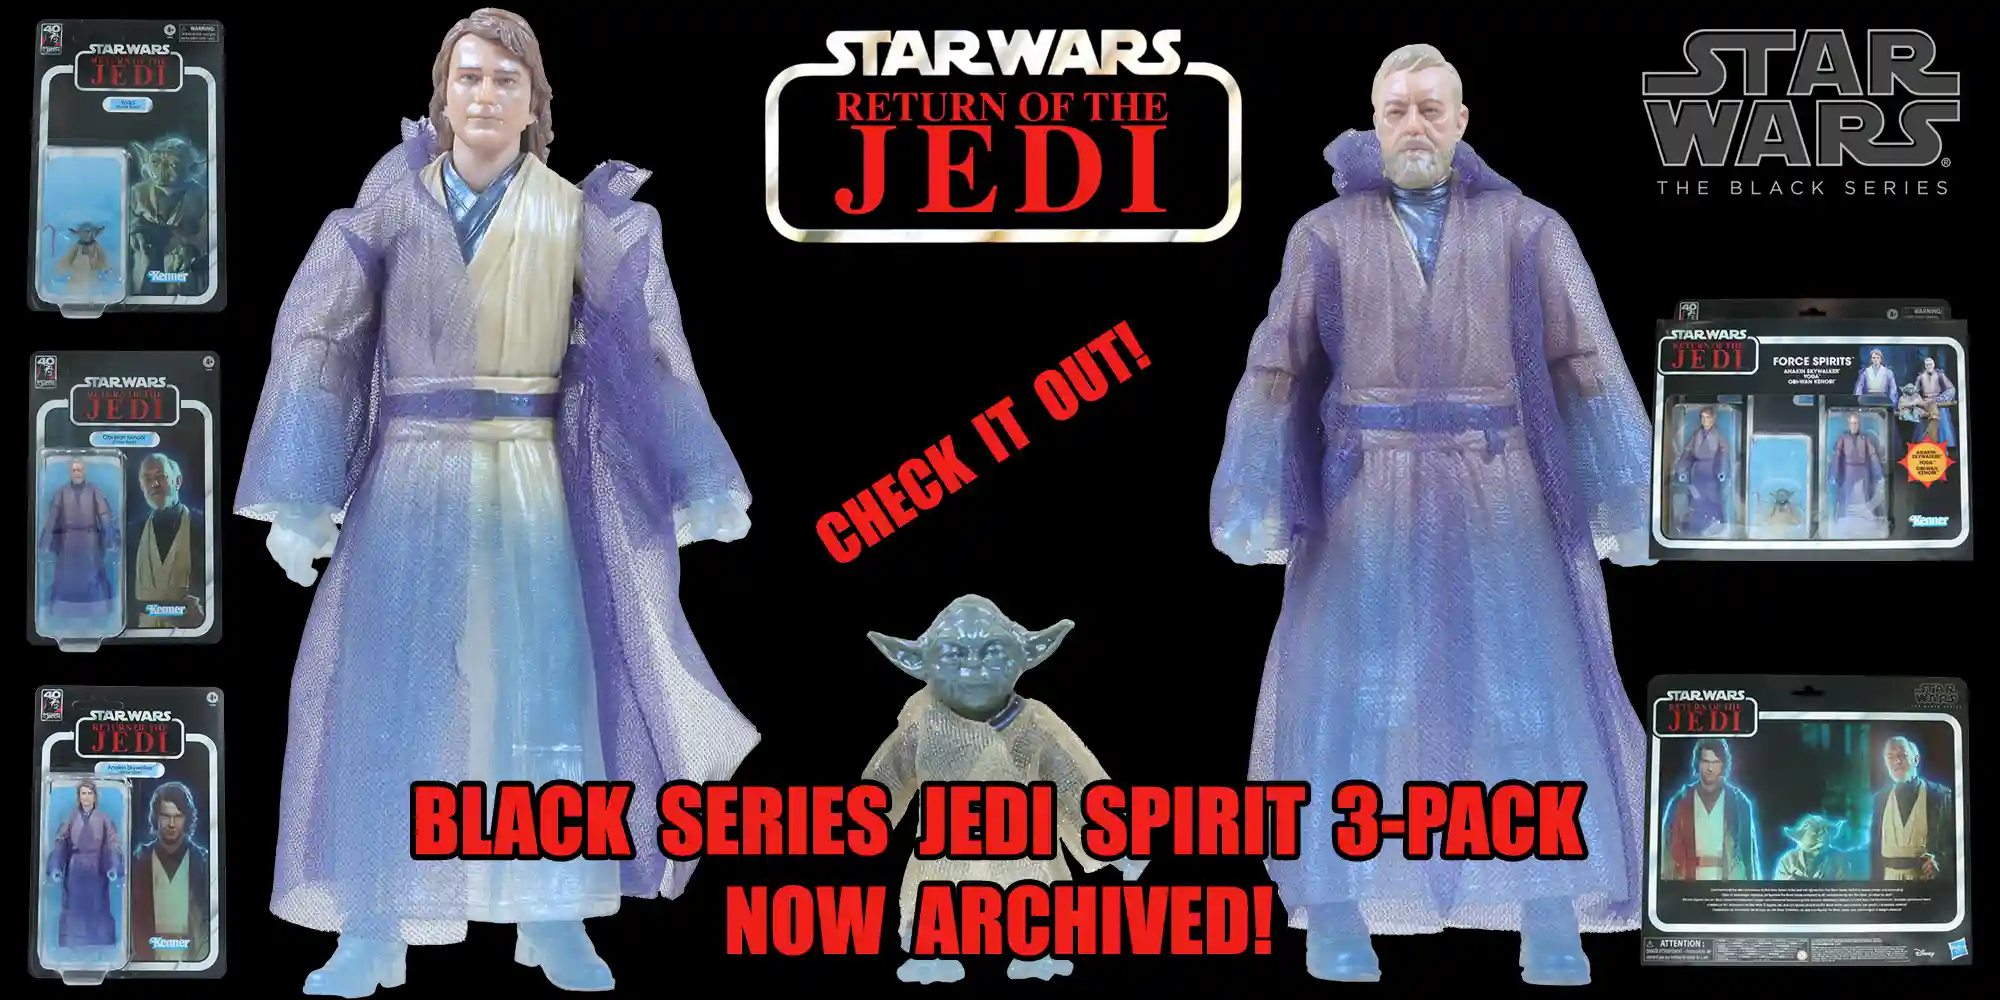 Jedi Spirit 3-Pack Archived - Check It Out!